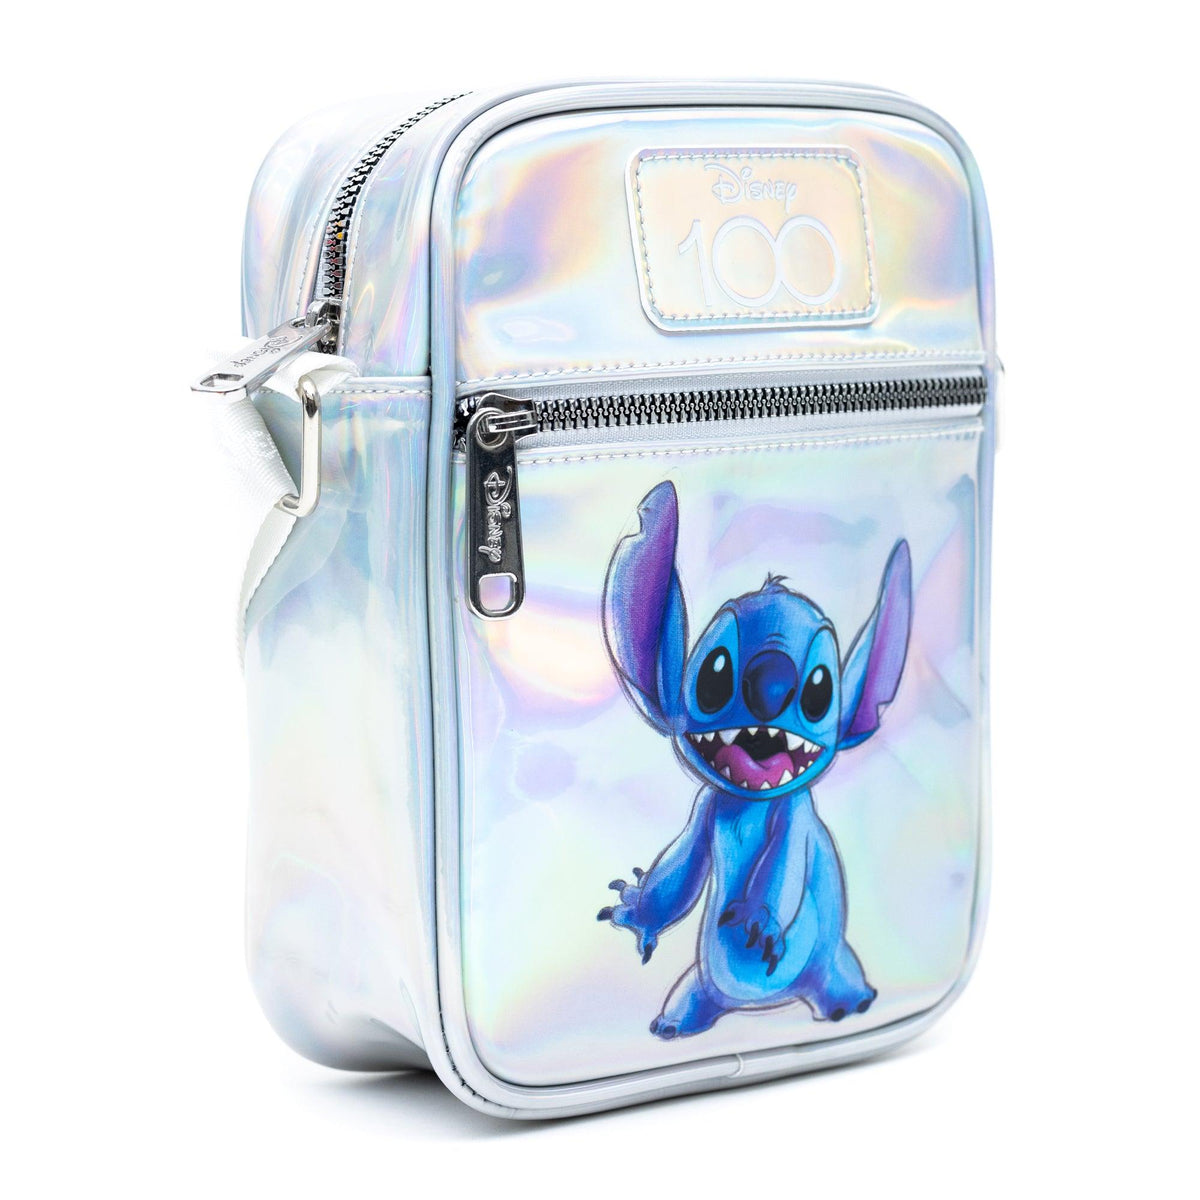 Disney: Lilo and Stitch Iridescent Holographic Zip Purse Crossbody Tote Bag Wallet